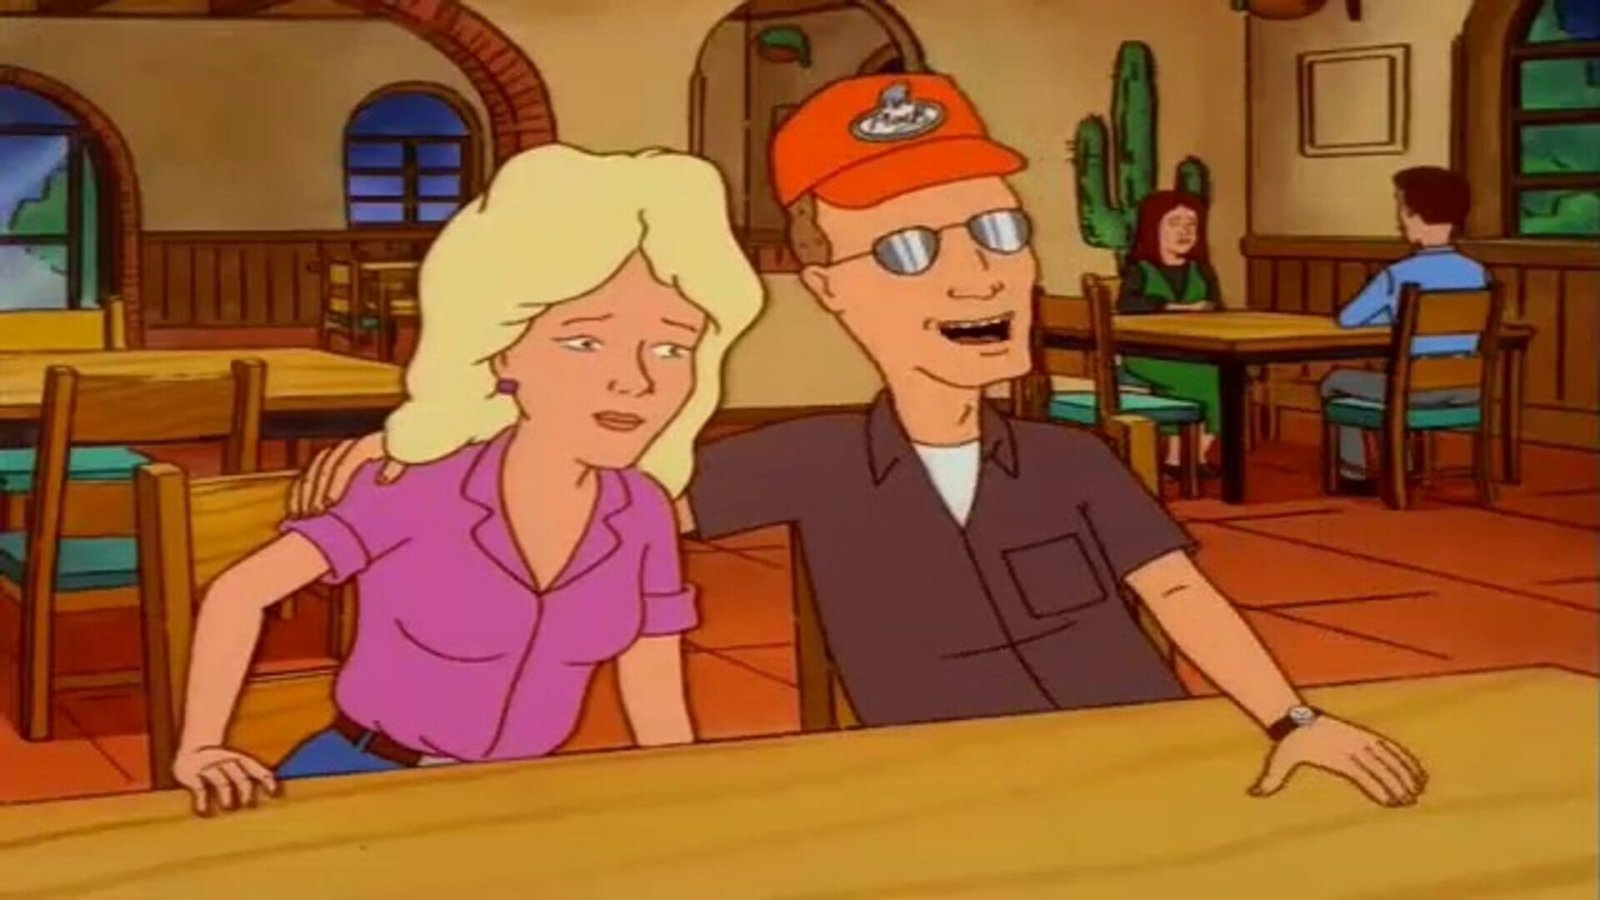 Best king of the hill episodes: I Don't Want to Wait (Season 5, Episode 3)